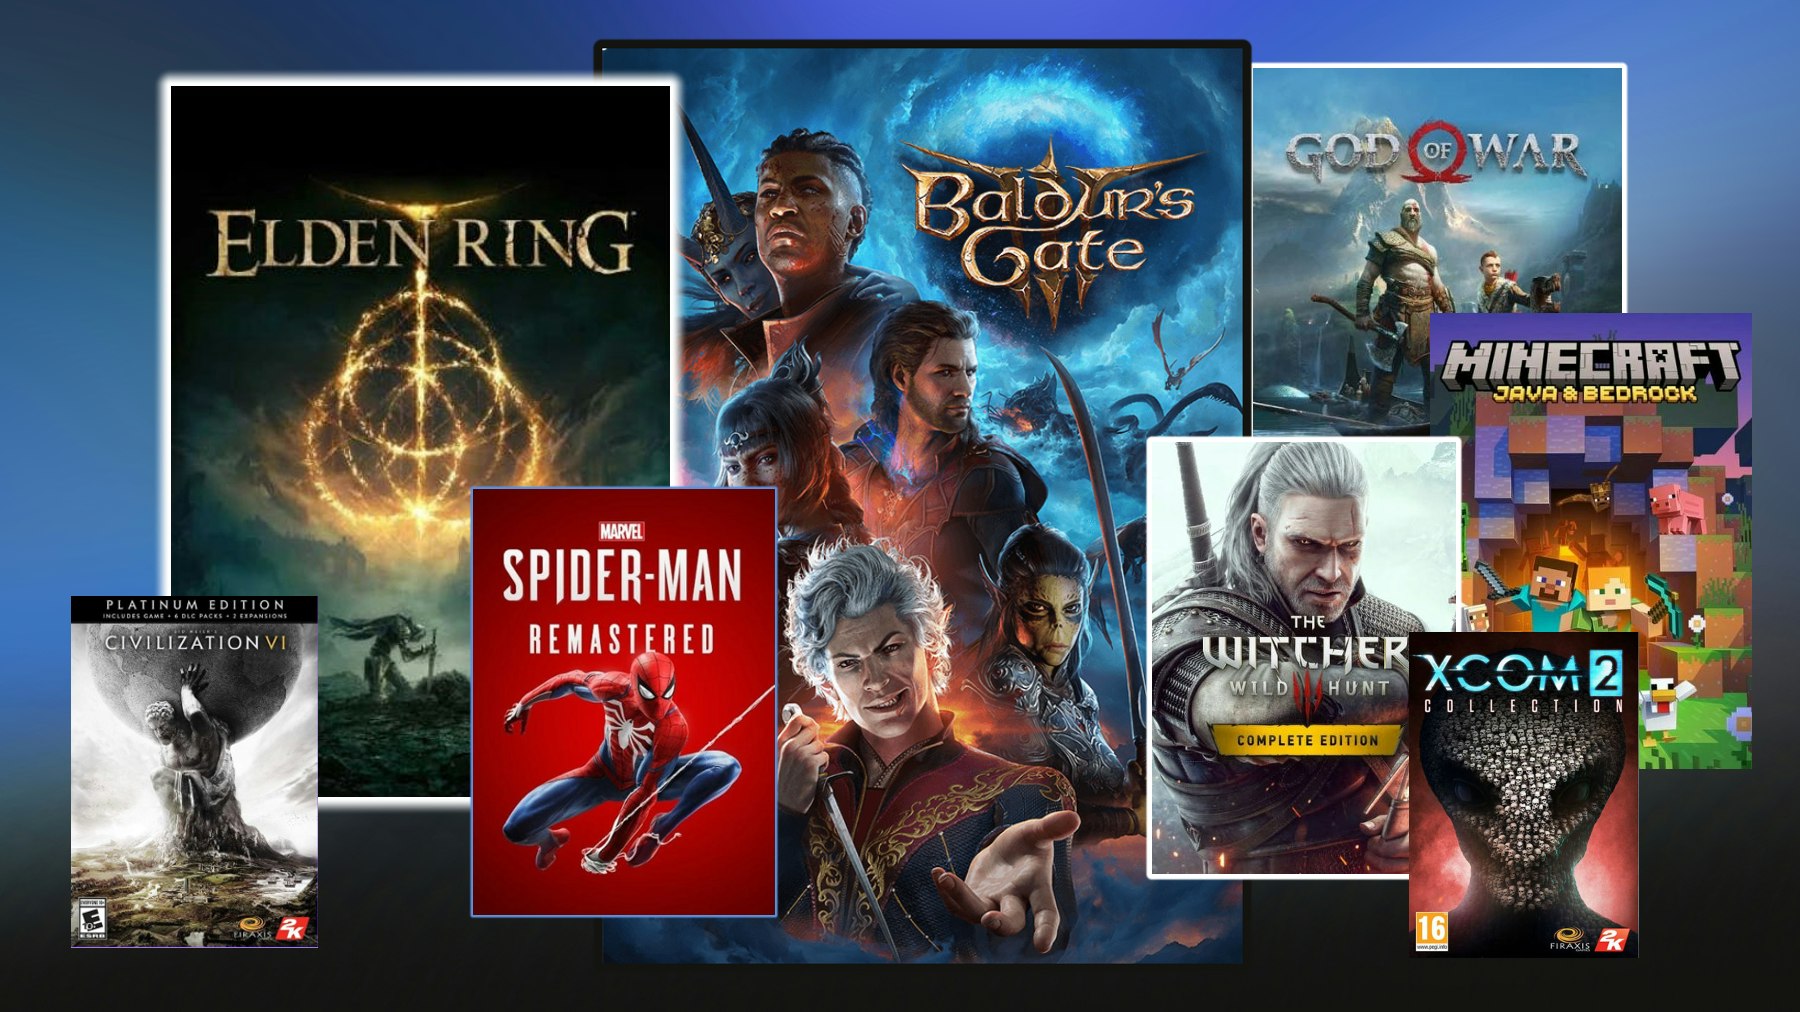 Best PC games 2022: Elden Ring, Fortnite and more free and paid